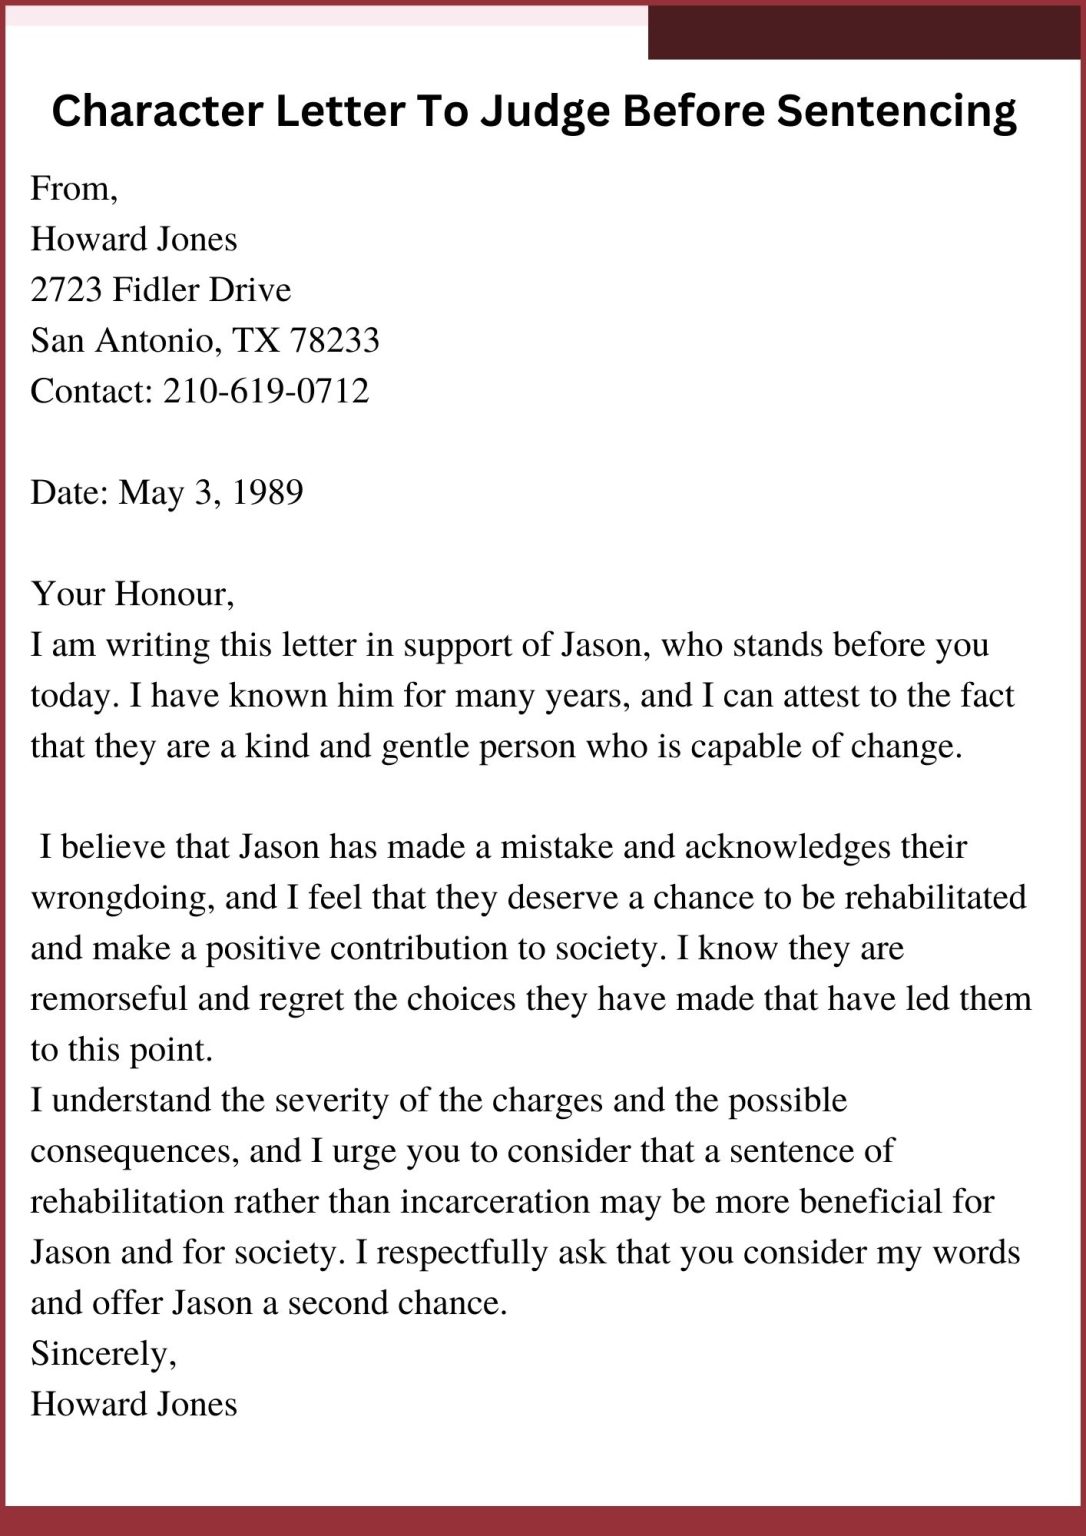 Sample Character Letter To Judge Before Sentencing Template